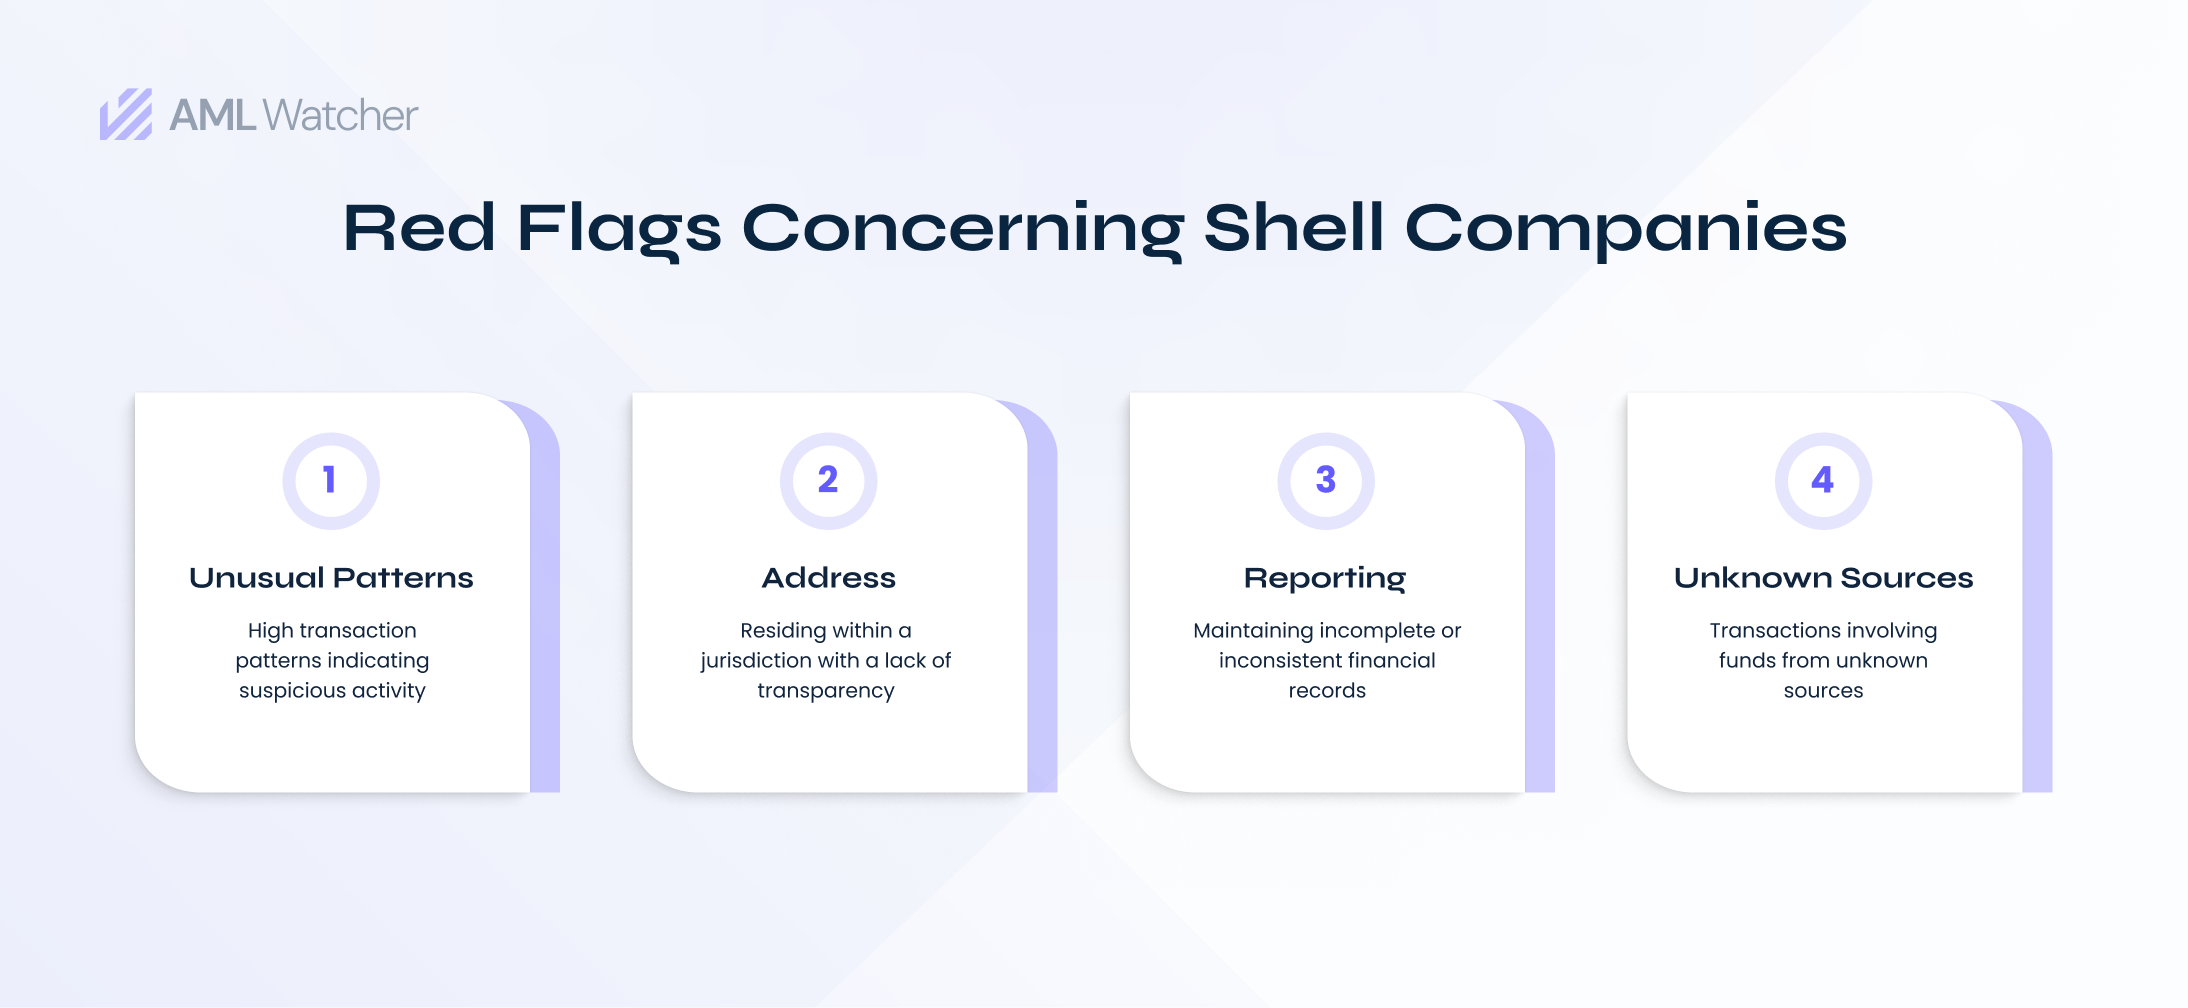 The featured image depicts the red flags concerning shell companies that make them quickly identifiable